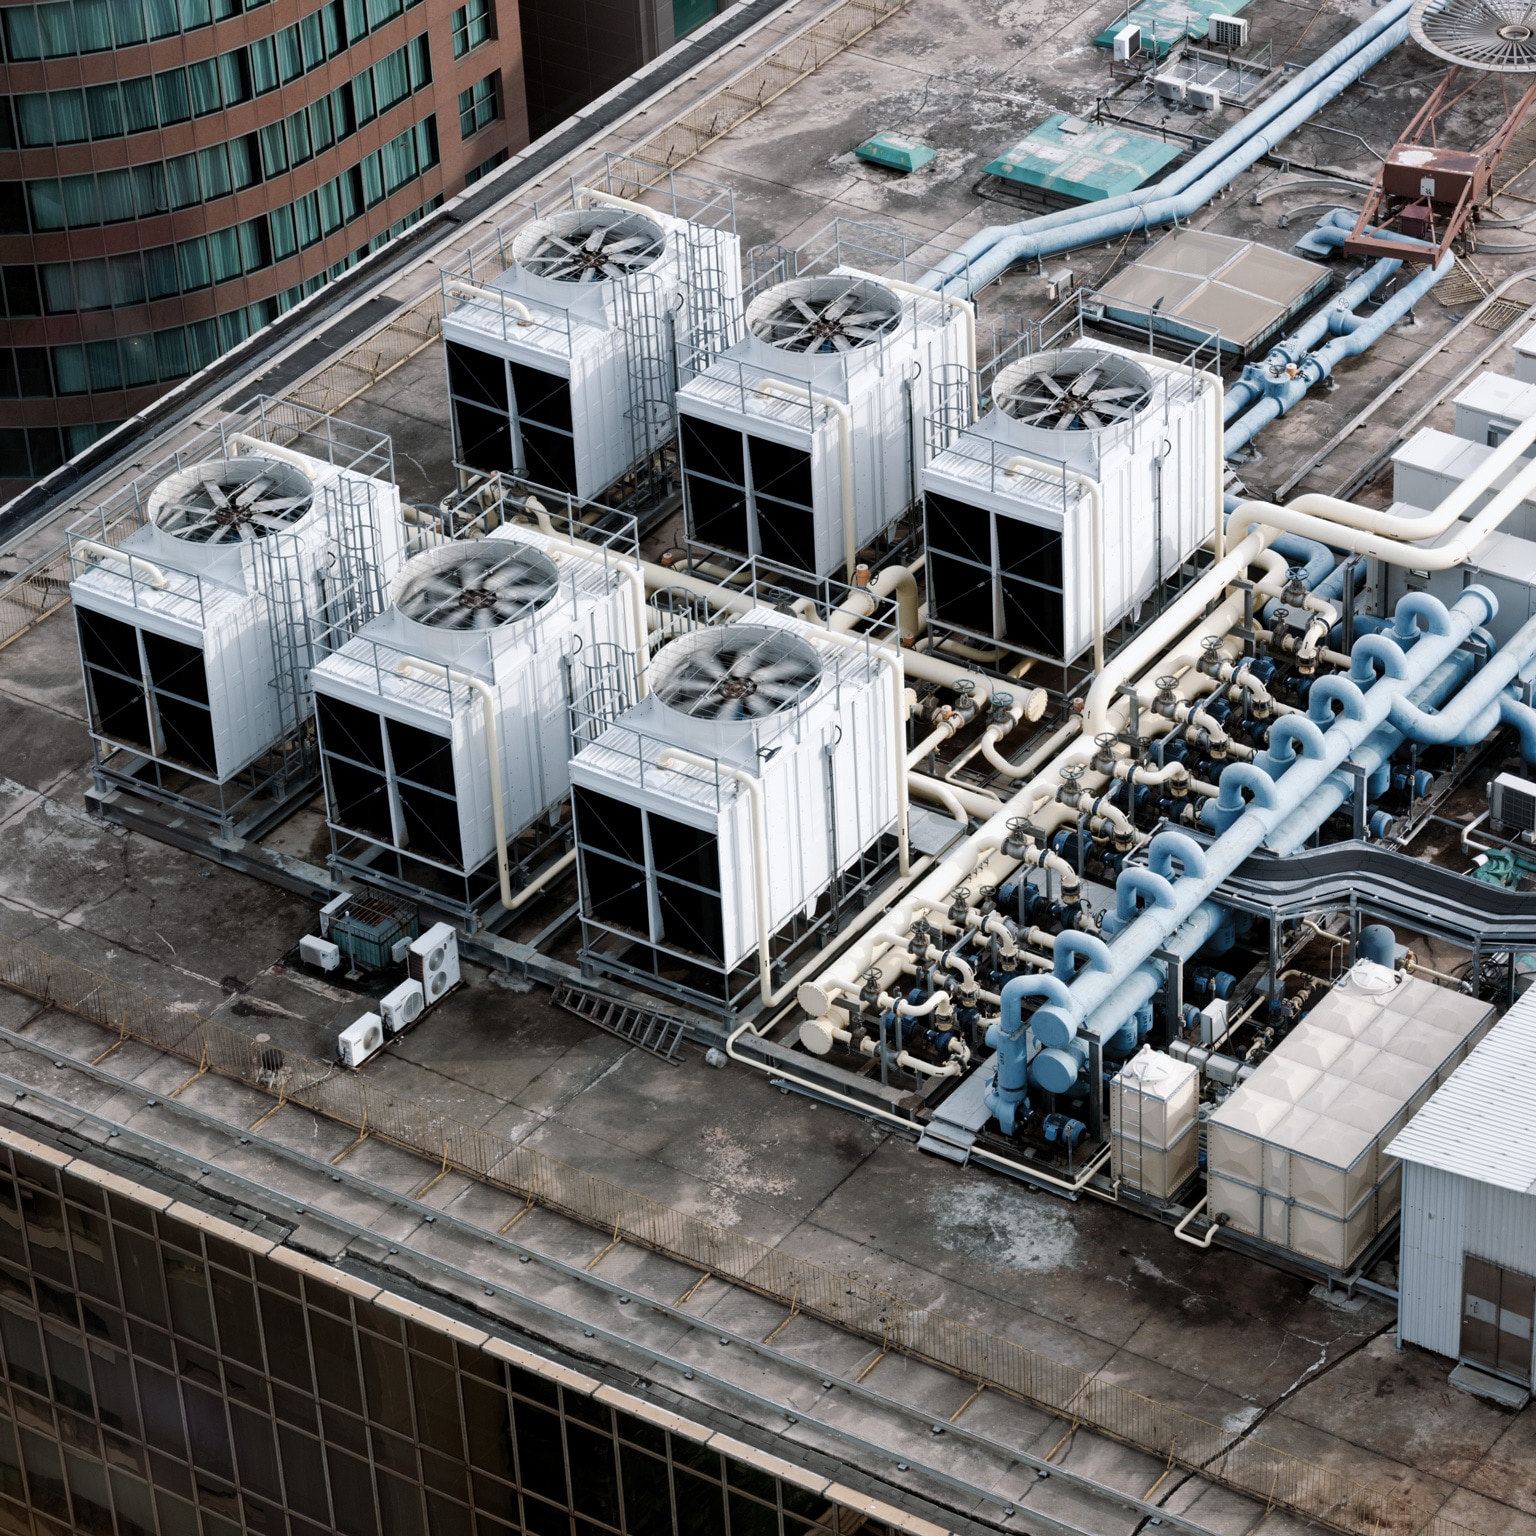 can-hvac-guidance-help-prevent-transmission-of-covid-19-mckinsey